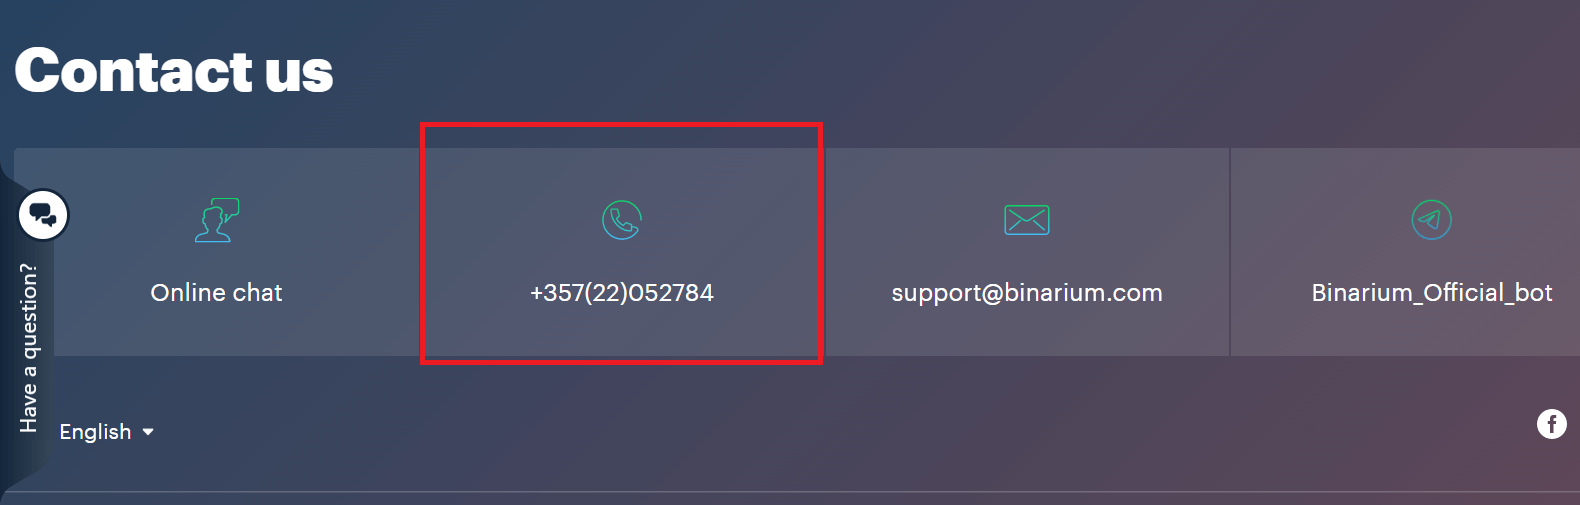 How to Contact Binarium Support